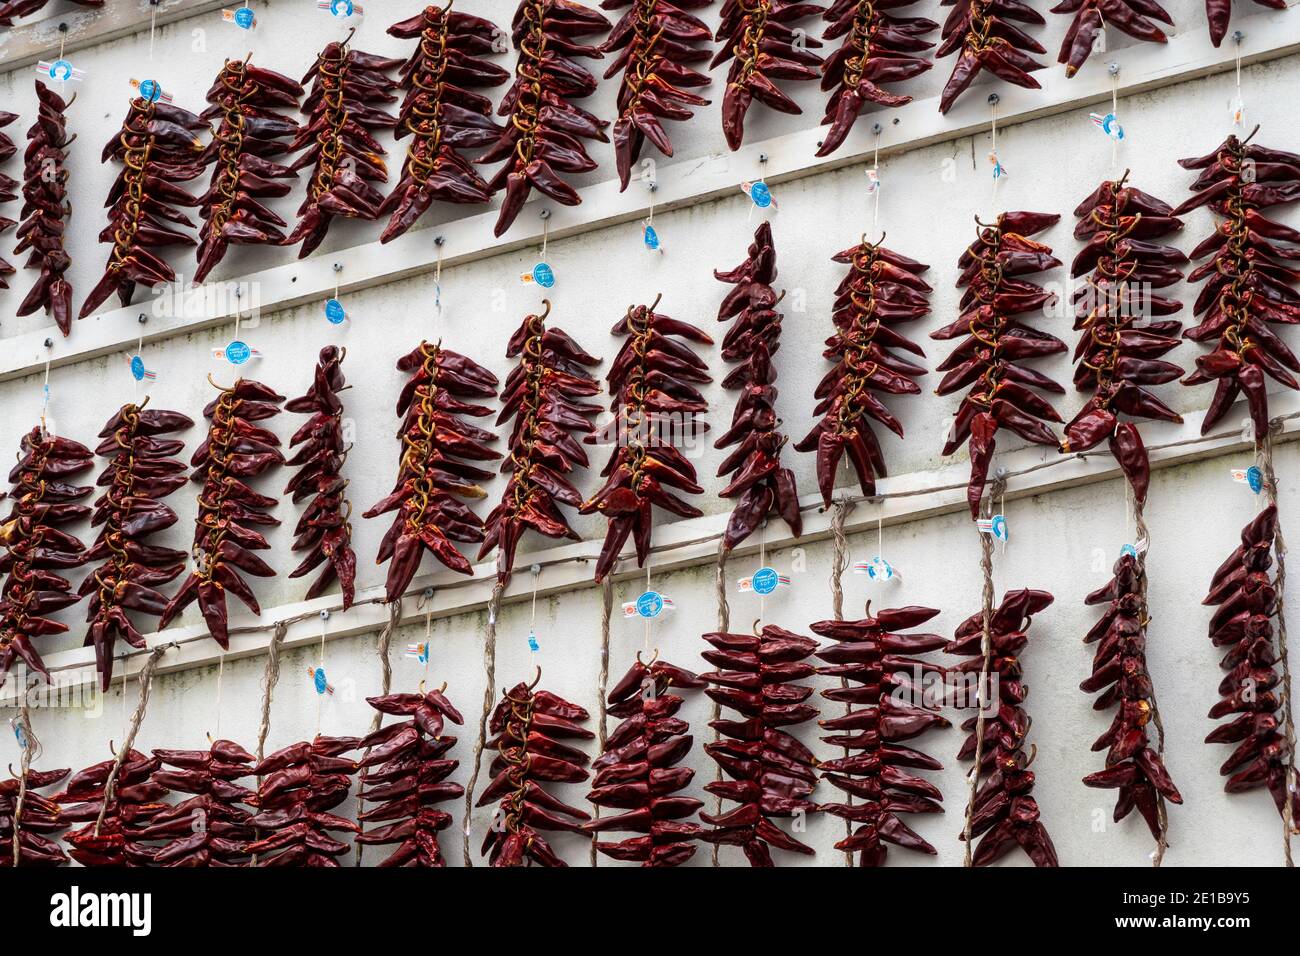 Strings of PDO Espelette chili peppers drying Stock Photo